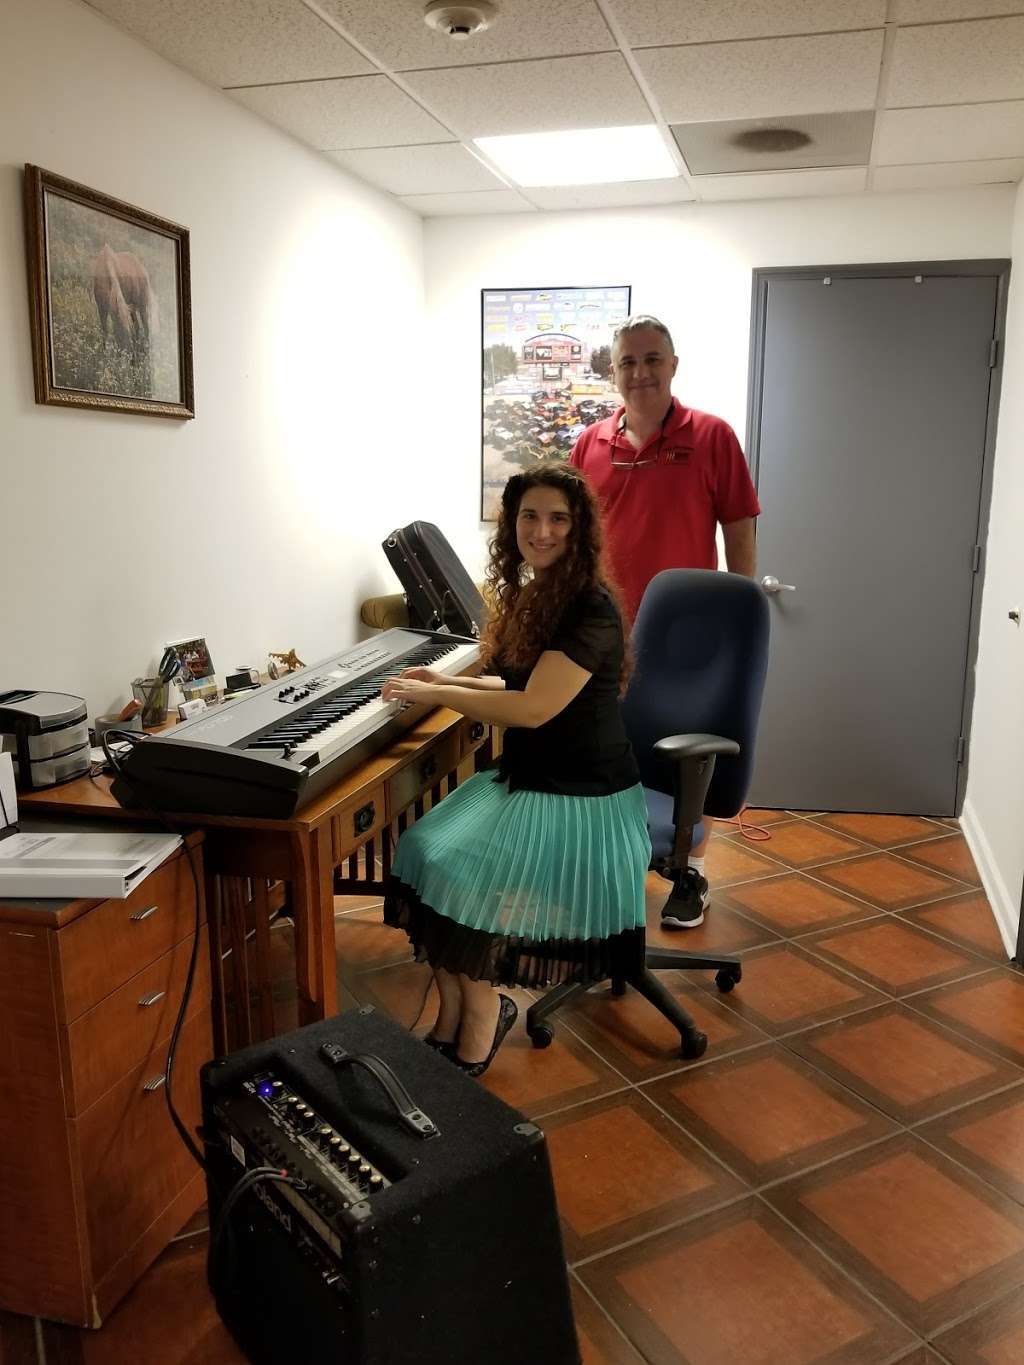 StudiobySarah - Piano, Violin, and viola music lessons and class | 3500 NW 84th Ave, Sunrise, FL 33351 | Phone: (305) 772-2099